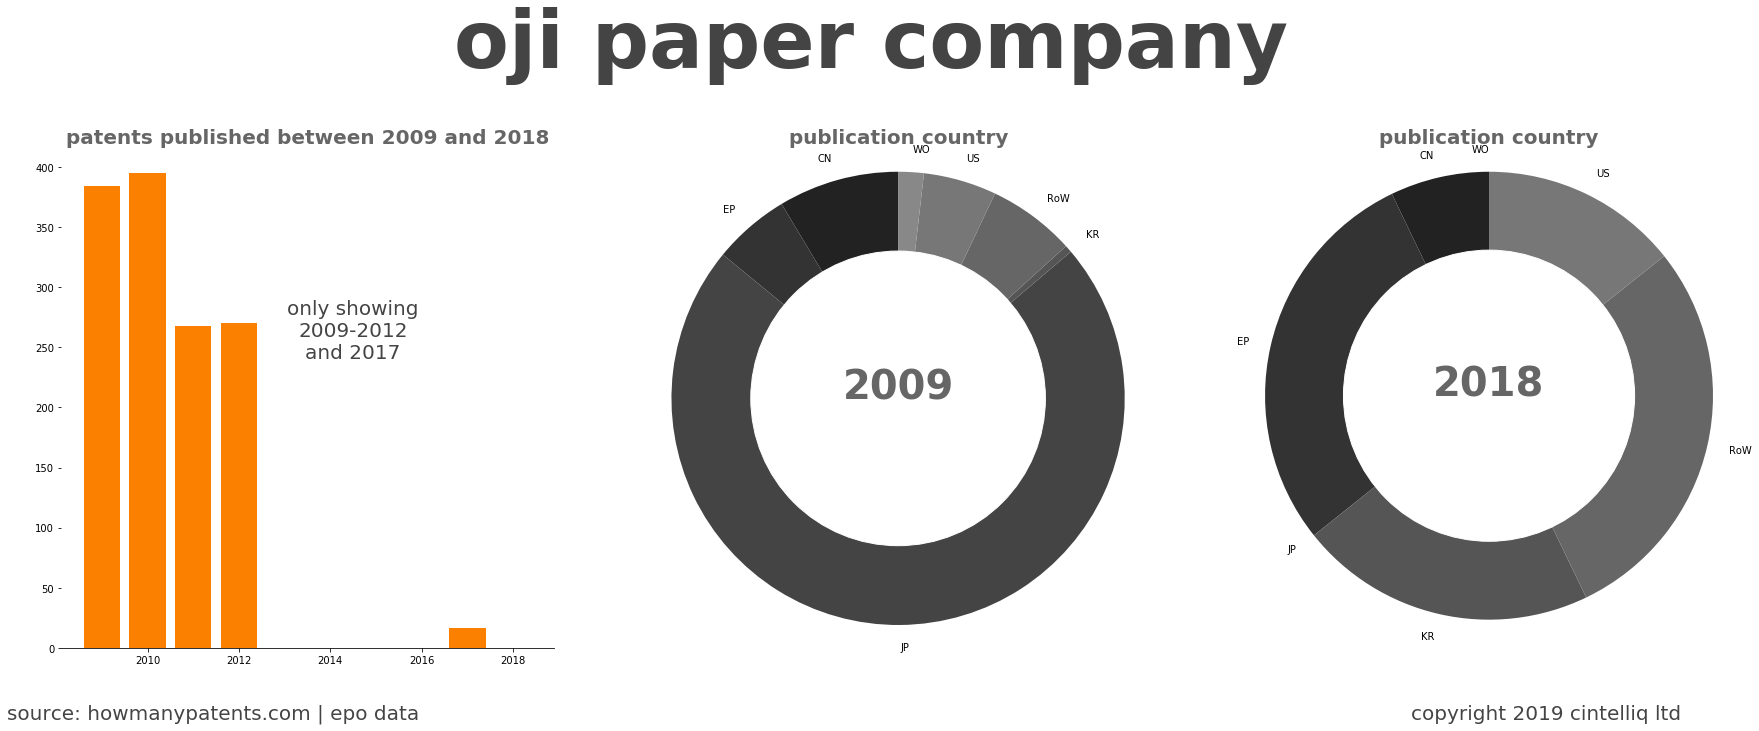 summary of patents for Oji Paper Company